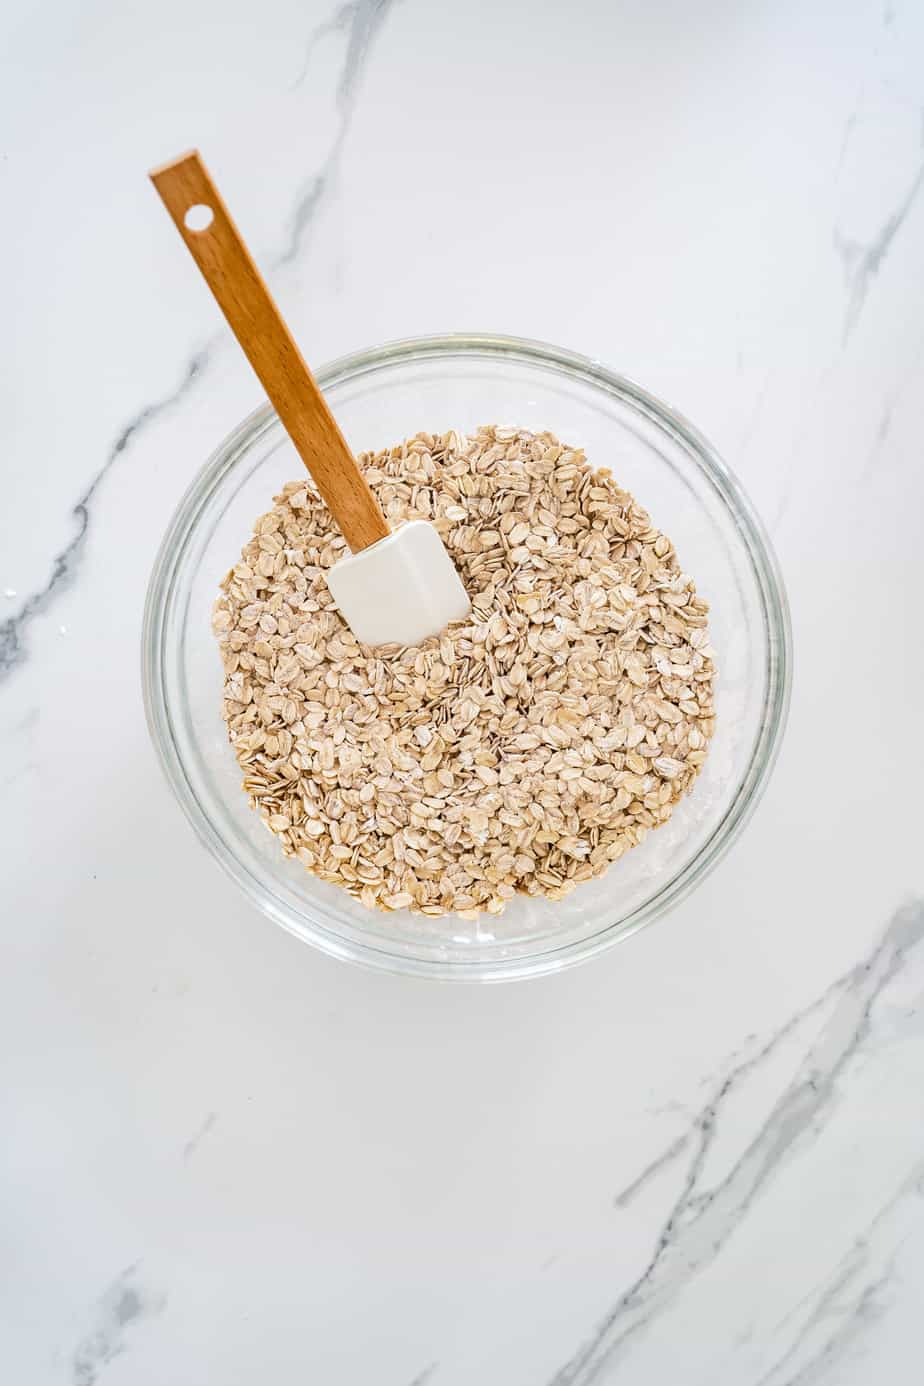 A mixing bowl with oatmeal and a spatula.